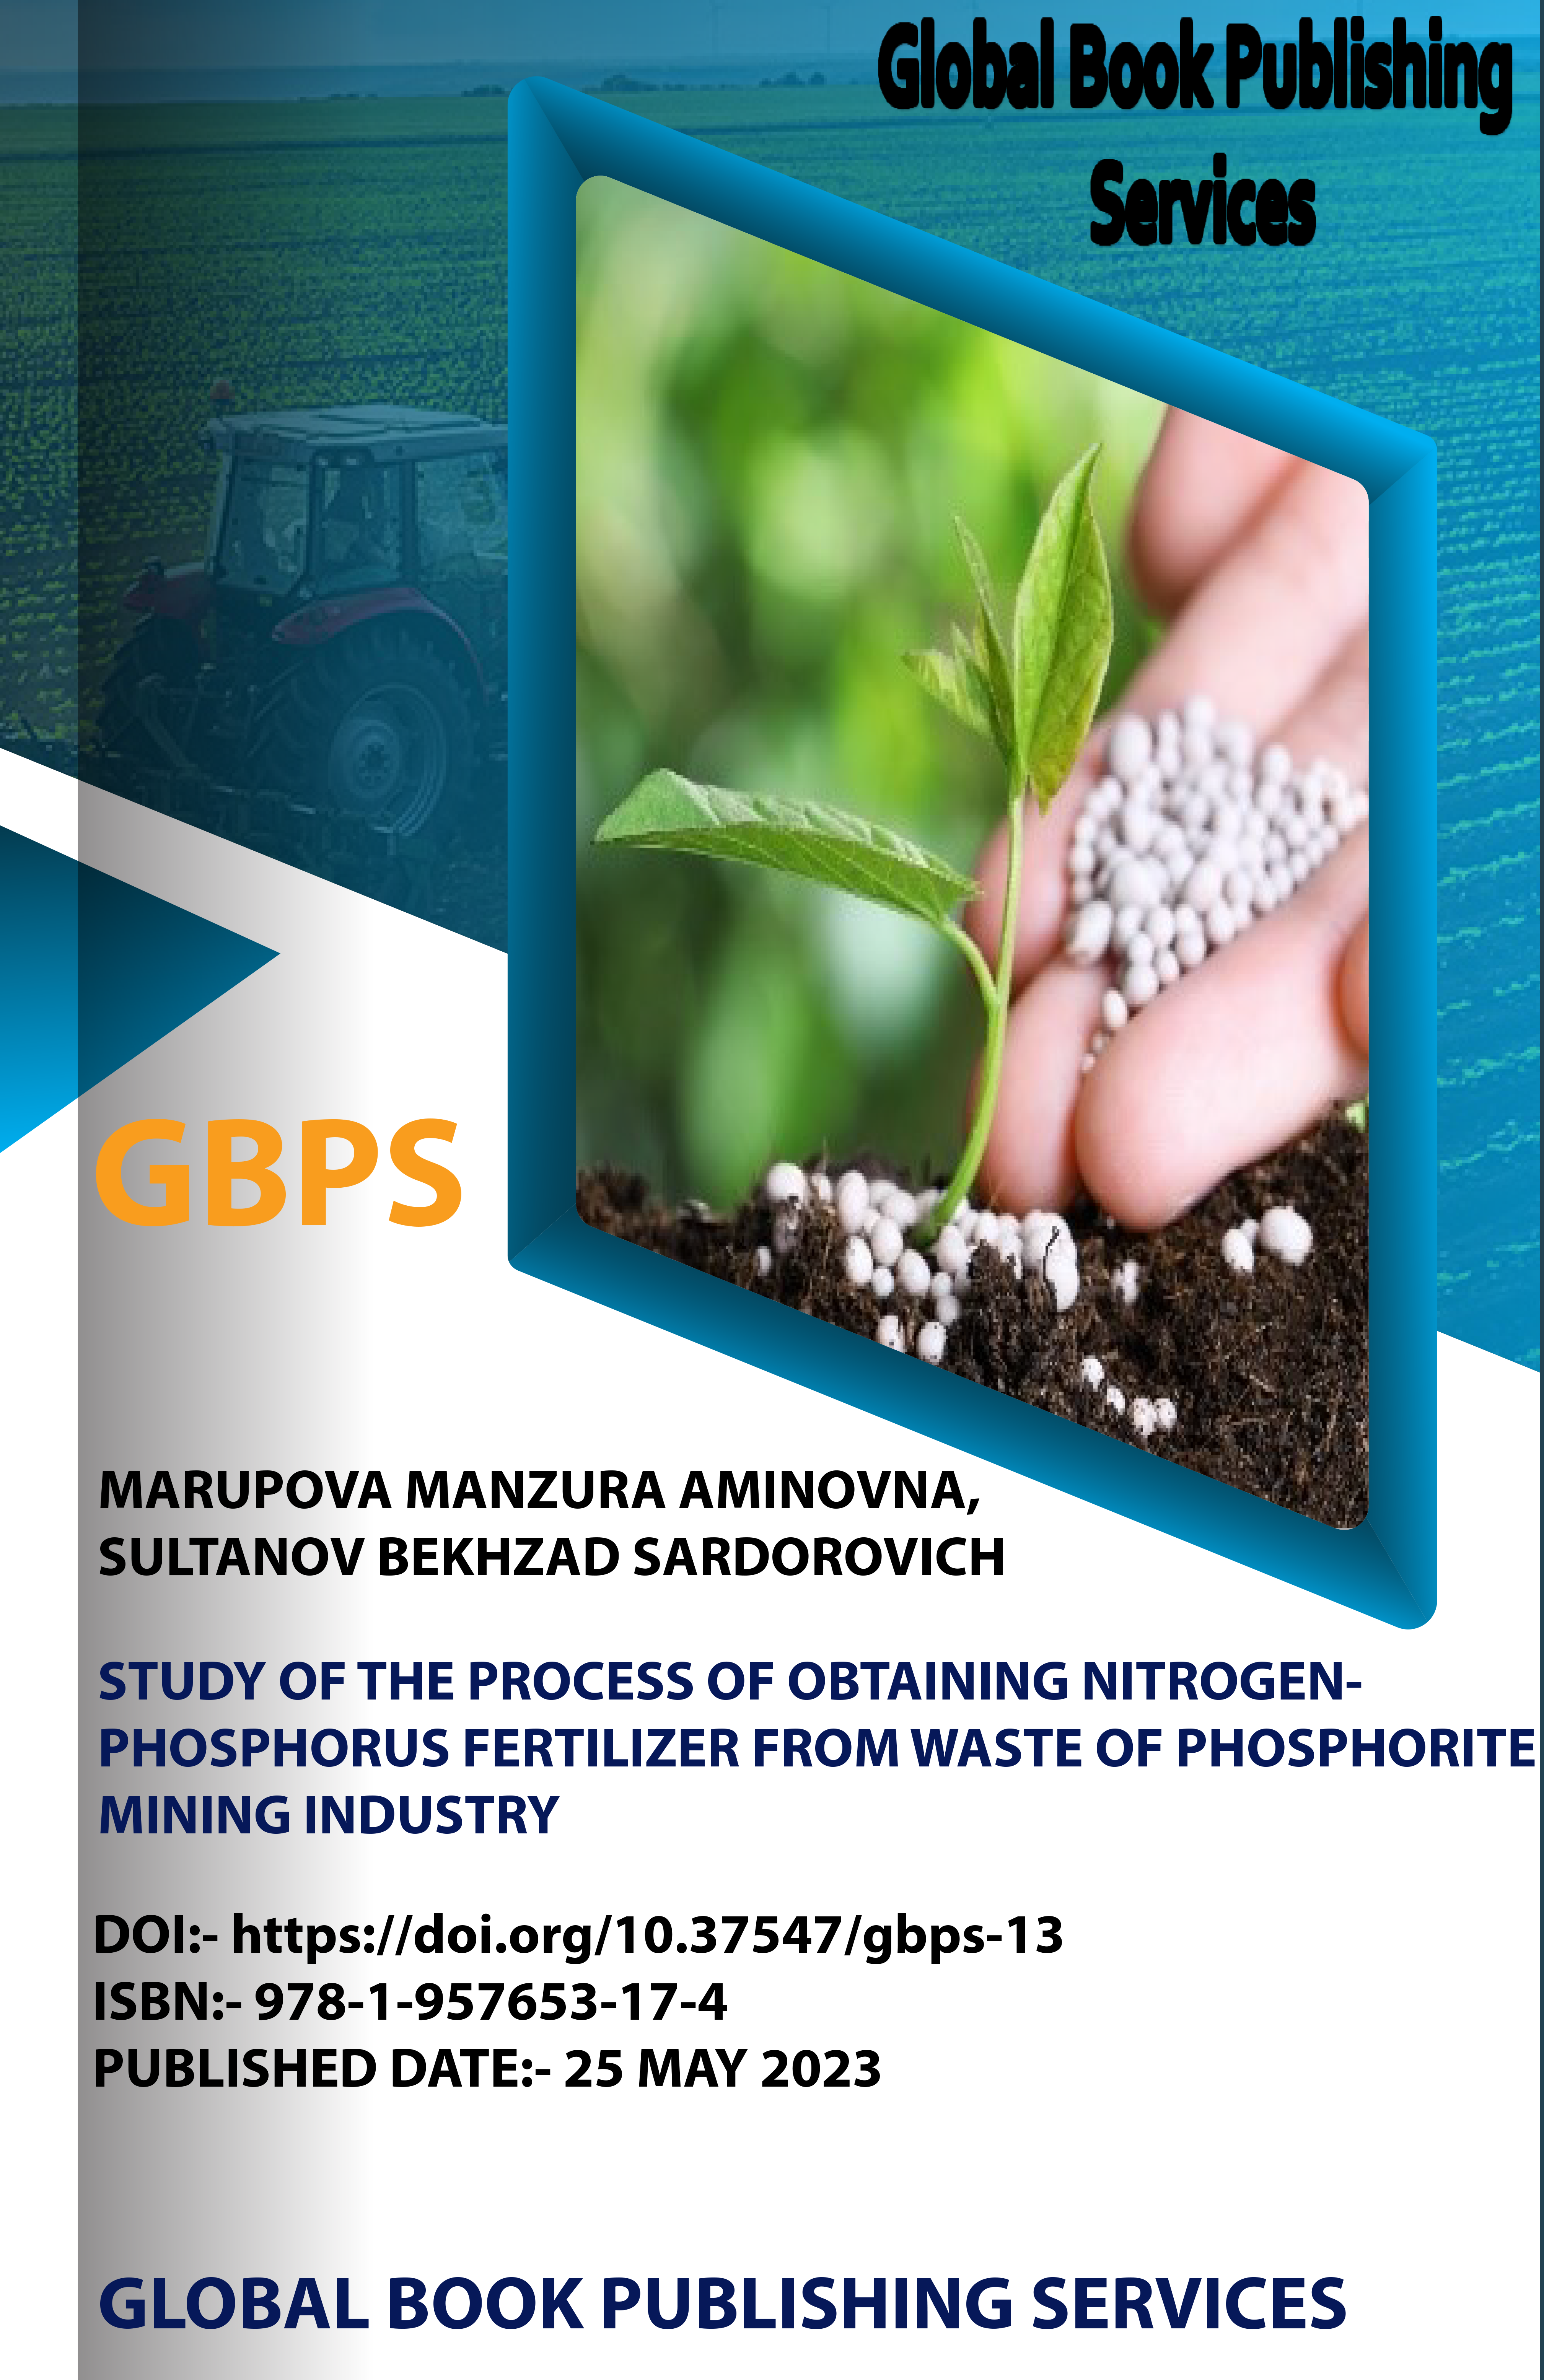 					View STUDY OF THE PROCESS OF OBTAINING NITROGEN-PHOSPHORUS FERTILIZER FROM WASTE OF PHOSPHORITE MINING INDUSTRY
				